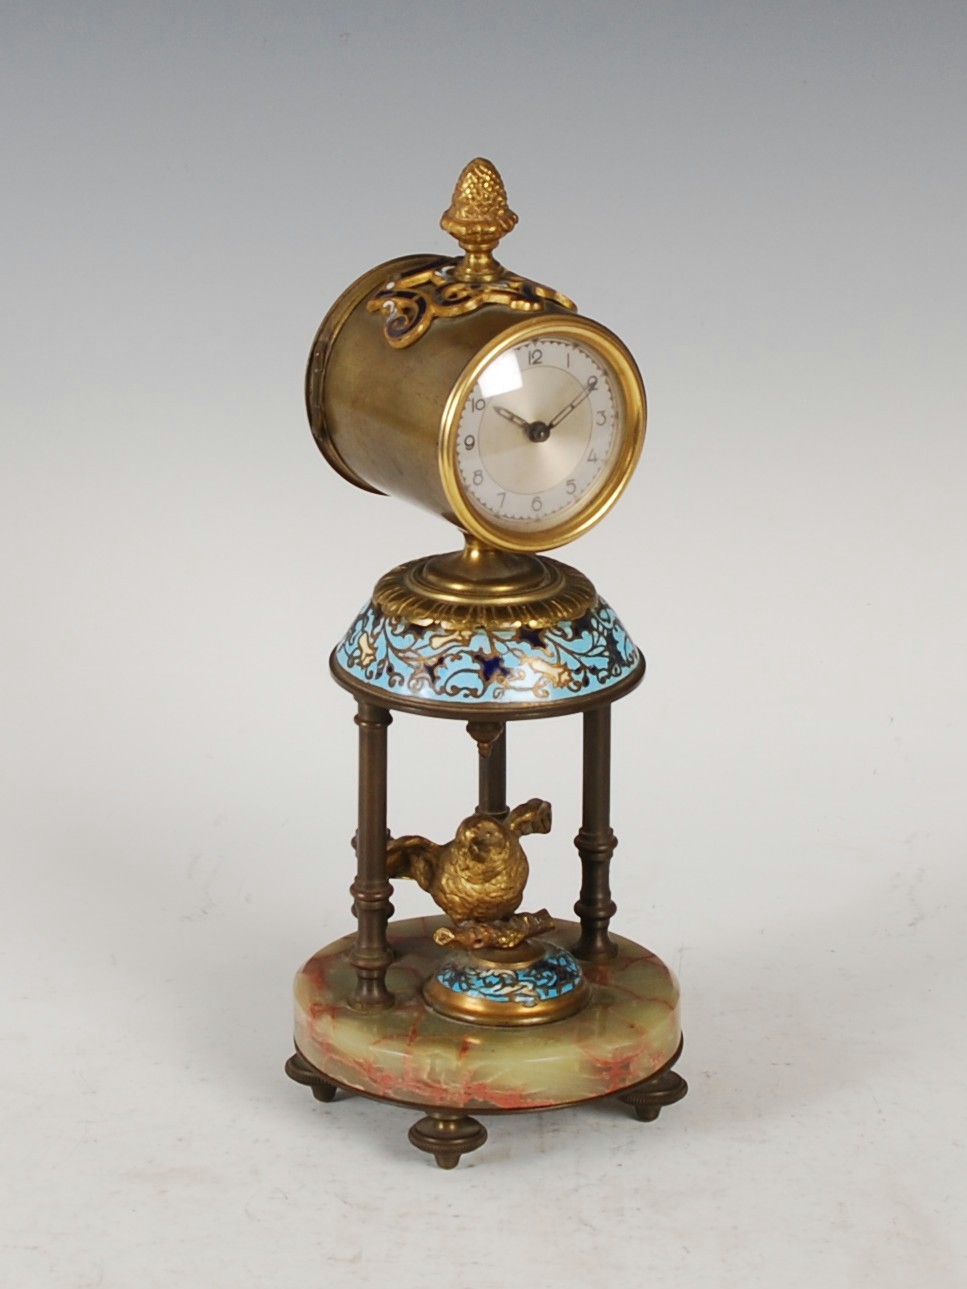 An early 20th century French champleve enamel mantle clock, the 2" silvered dial with Arabic